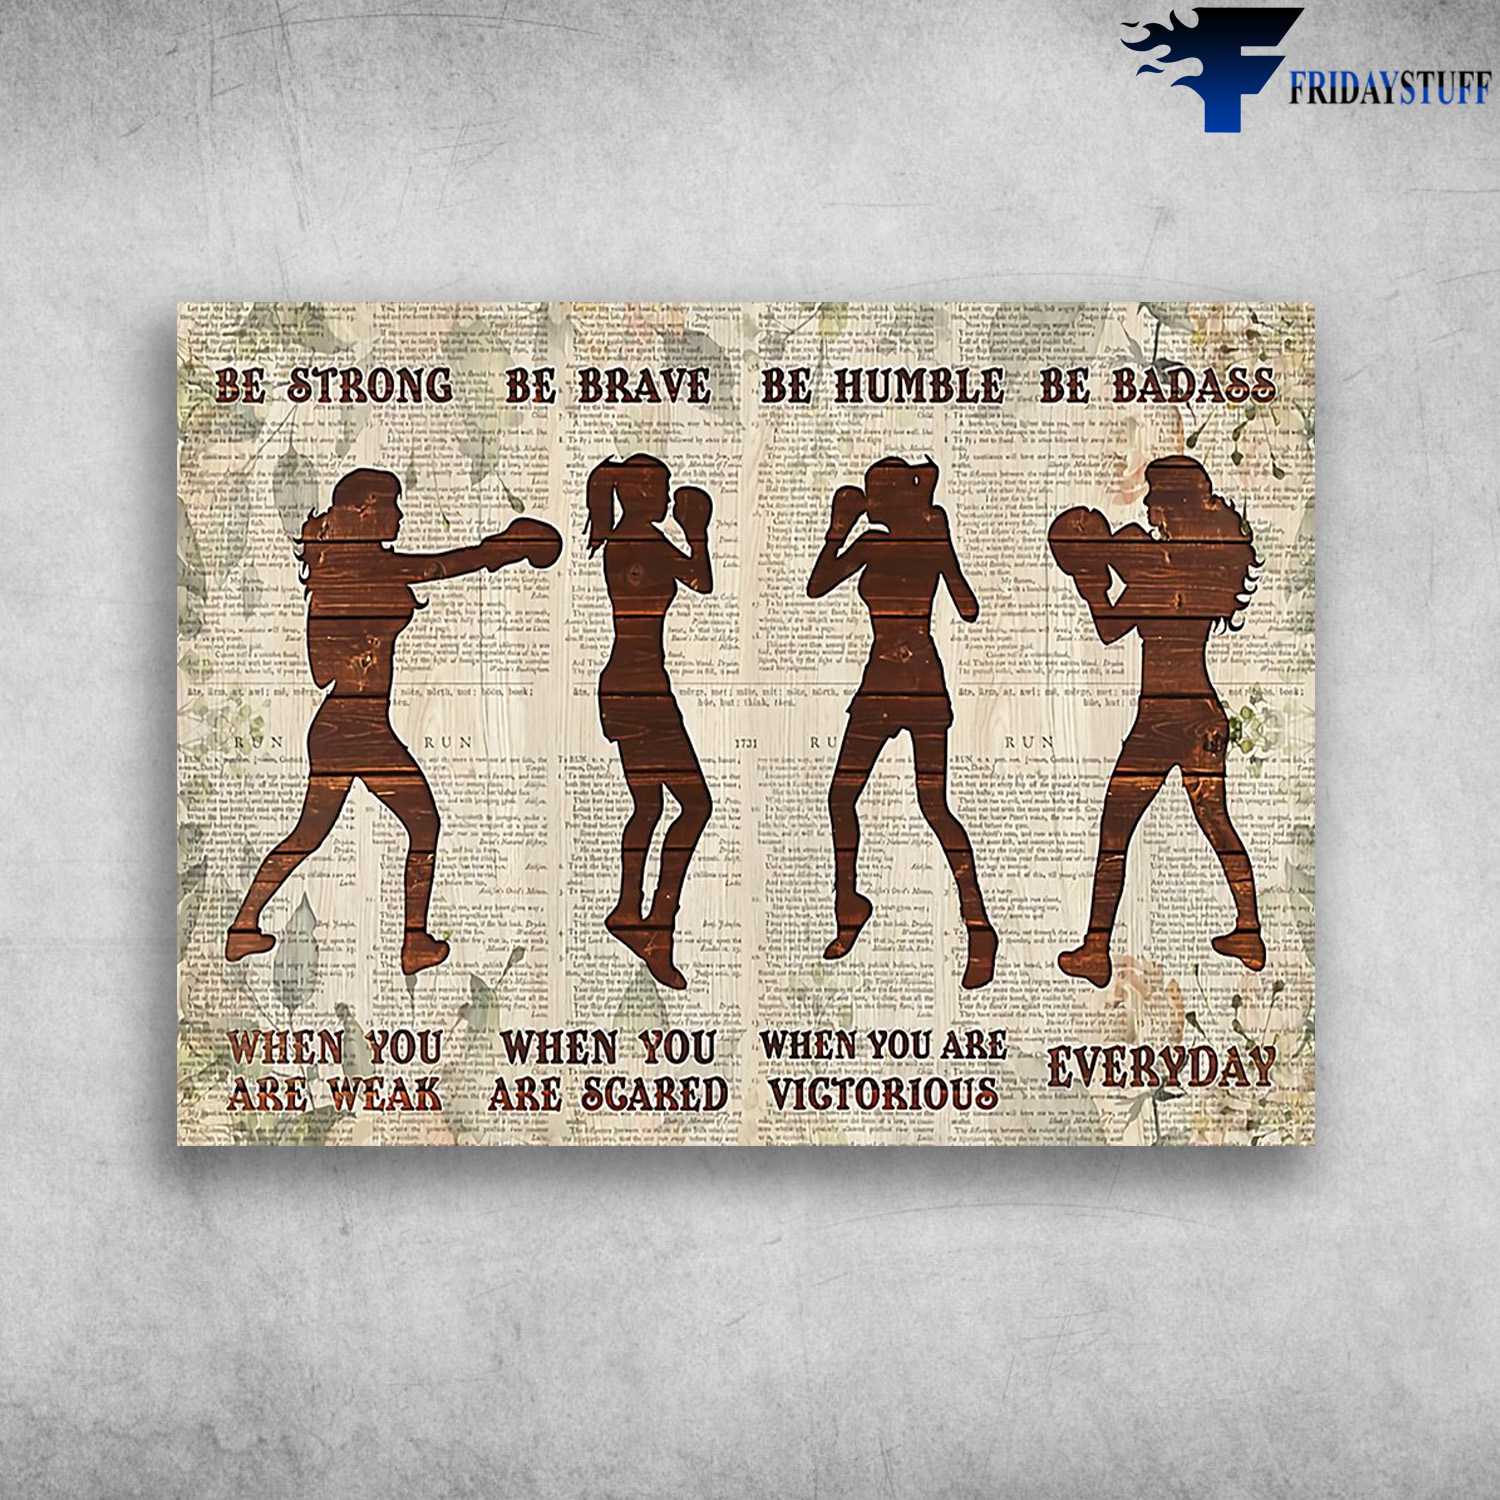 Boxing Lady, Boxing Poster - Be Strong When You Are Weak, Be Brave When You Are Scared, Be Humble When You Are Victorious, Be Badass Everyday